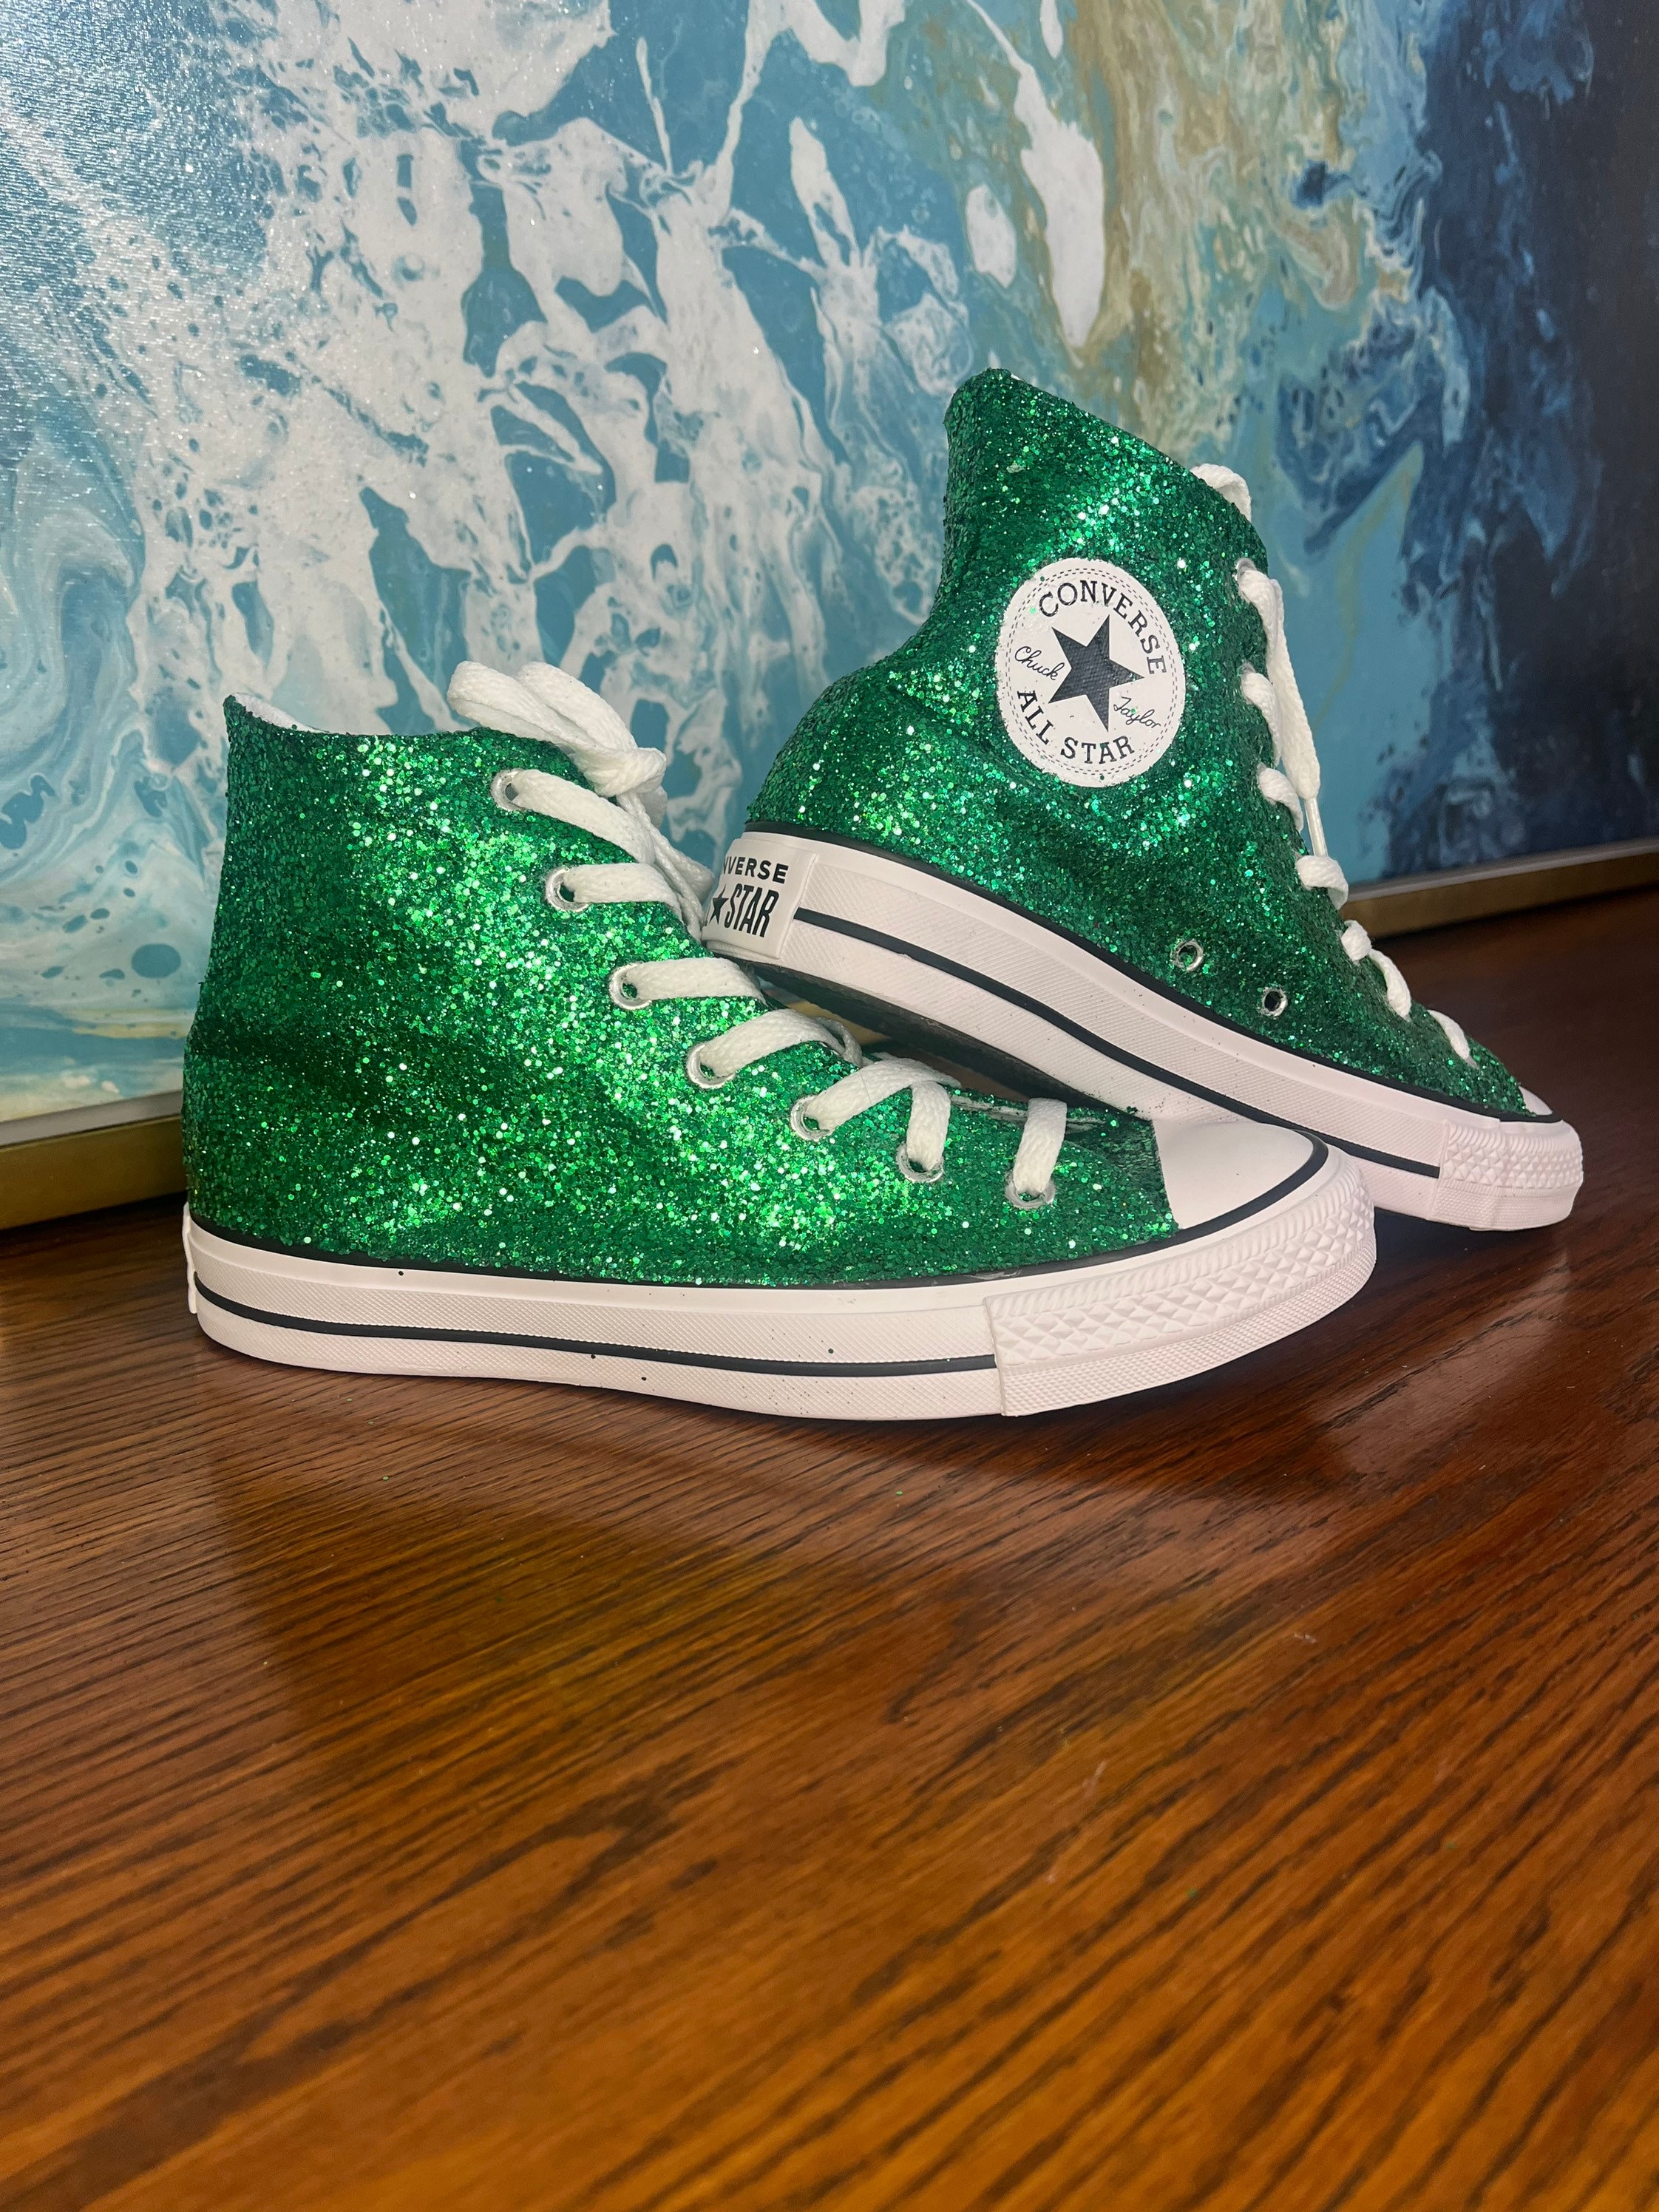 Authentic Converse All Stars in Green Glitter. Shamrock Etsy